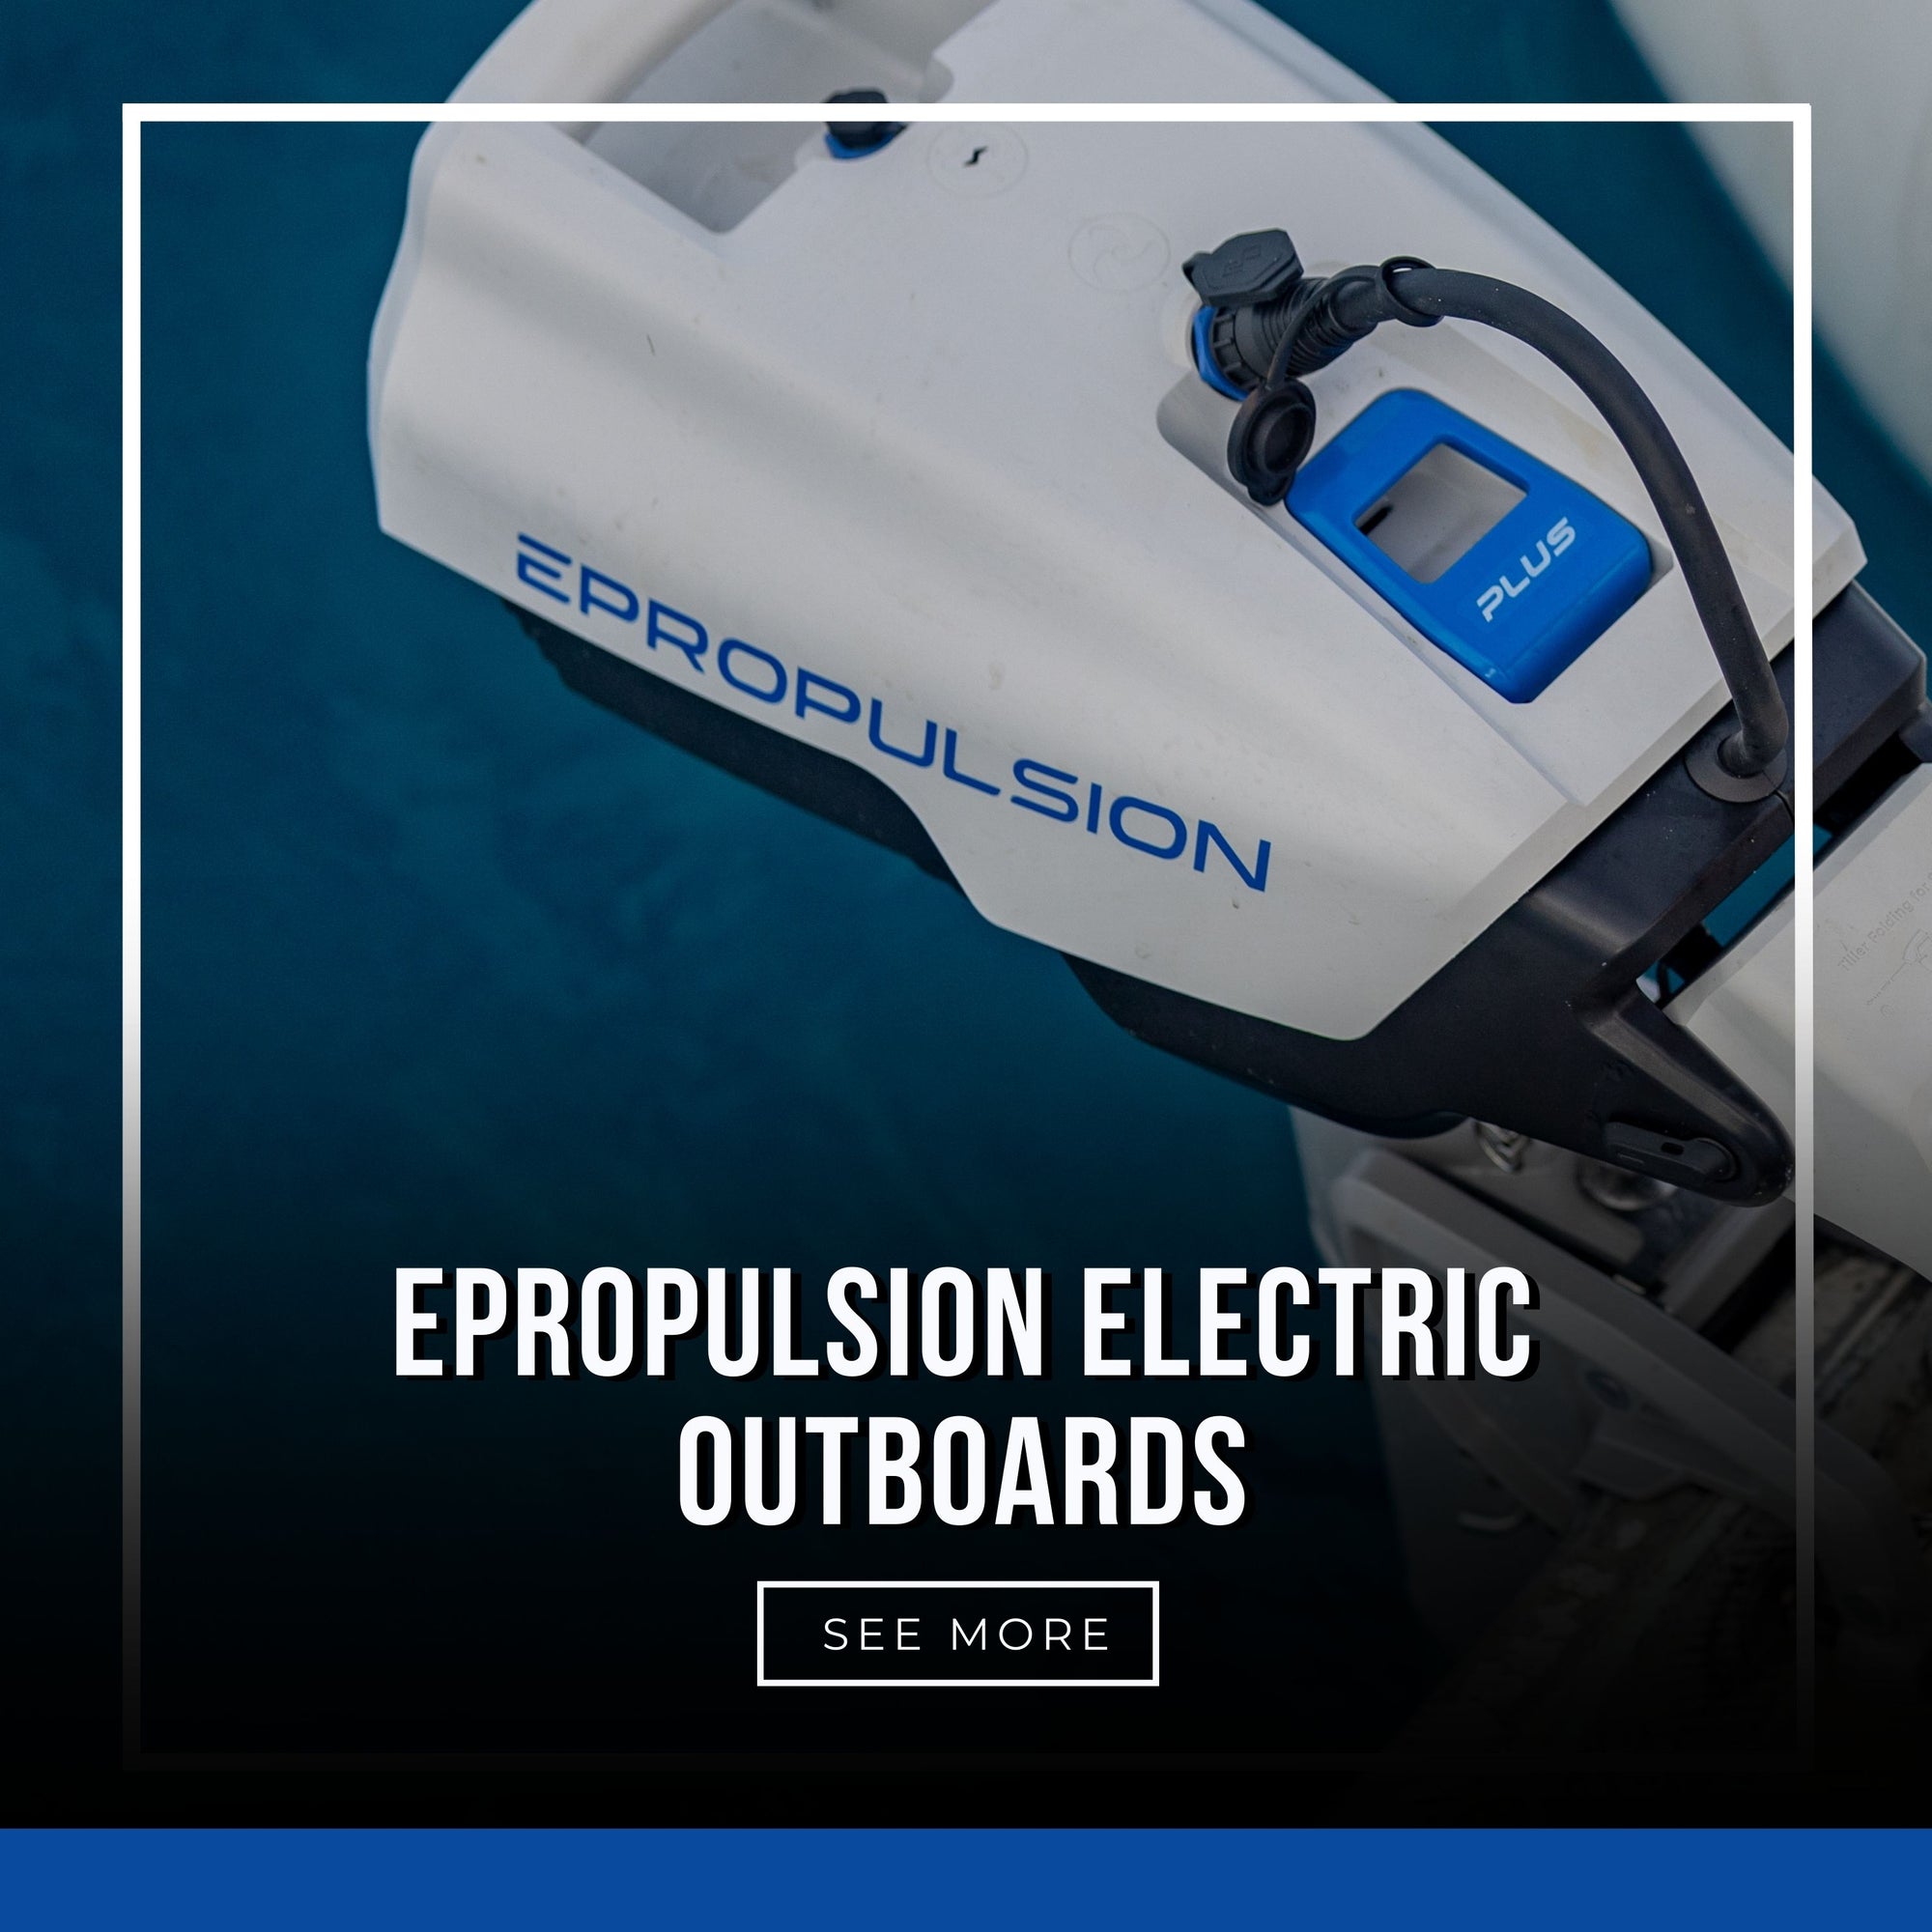 EPropulsion Electric Outboards